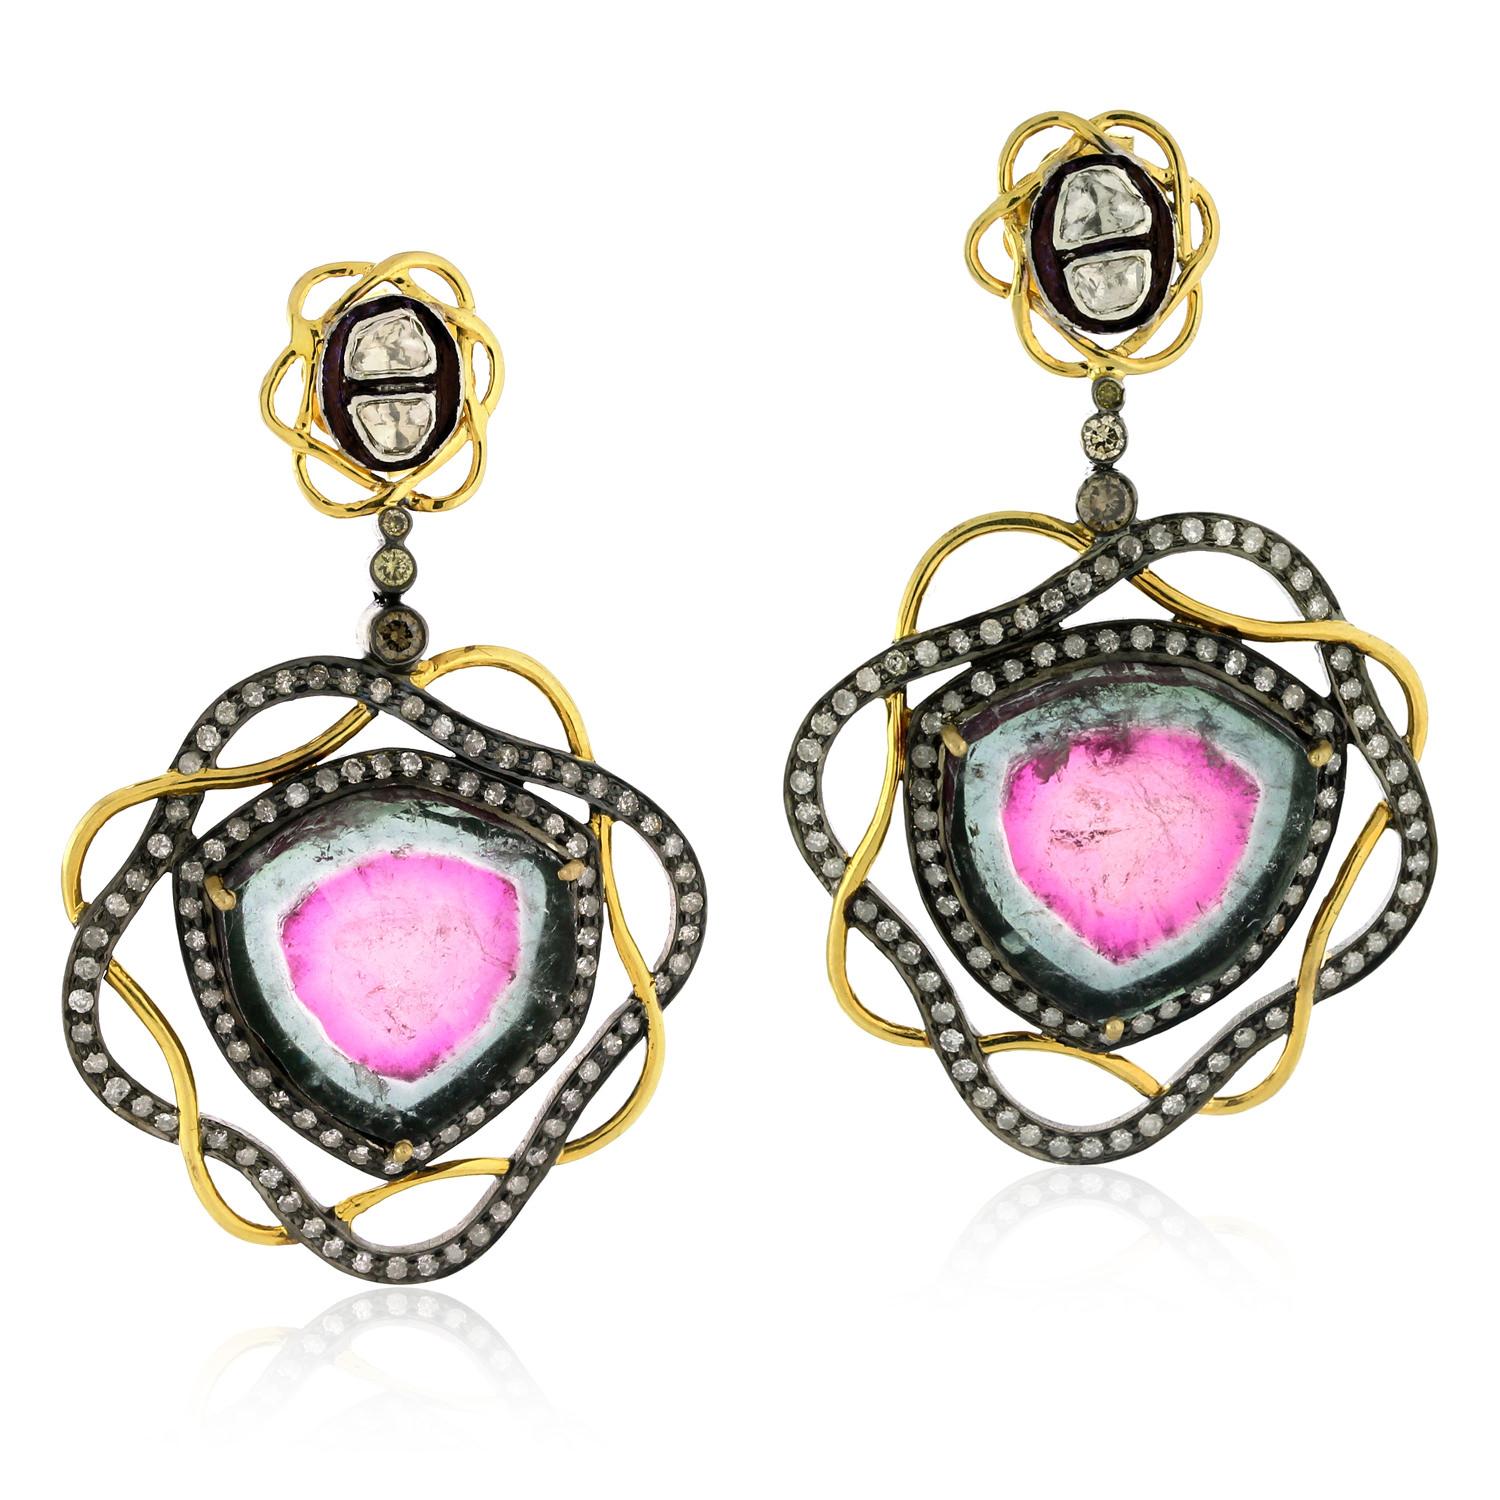 Mixed Cut Pink Tourmaline earring Enclosed In Pave Diamonds Set Made In 18k Gold & Silver For Sale